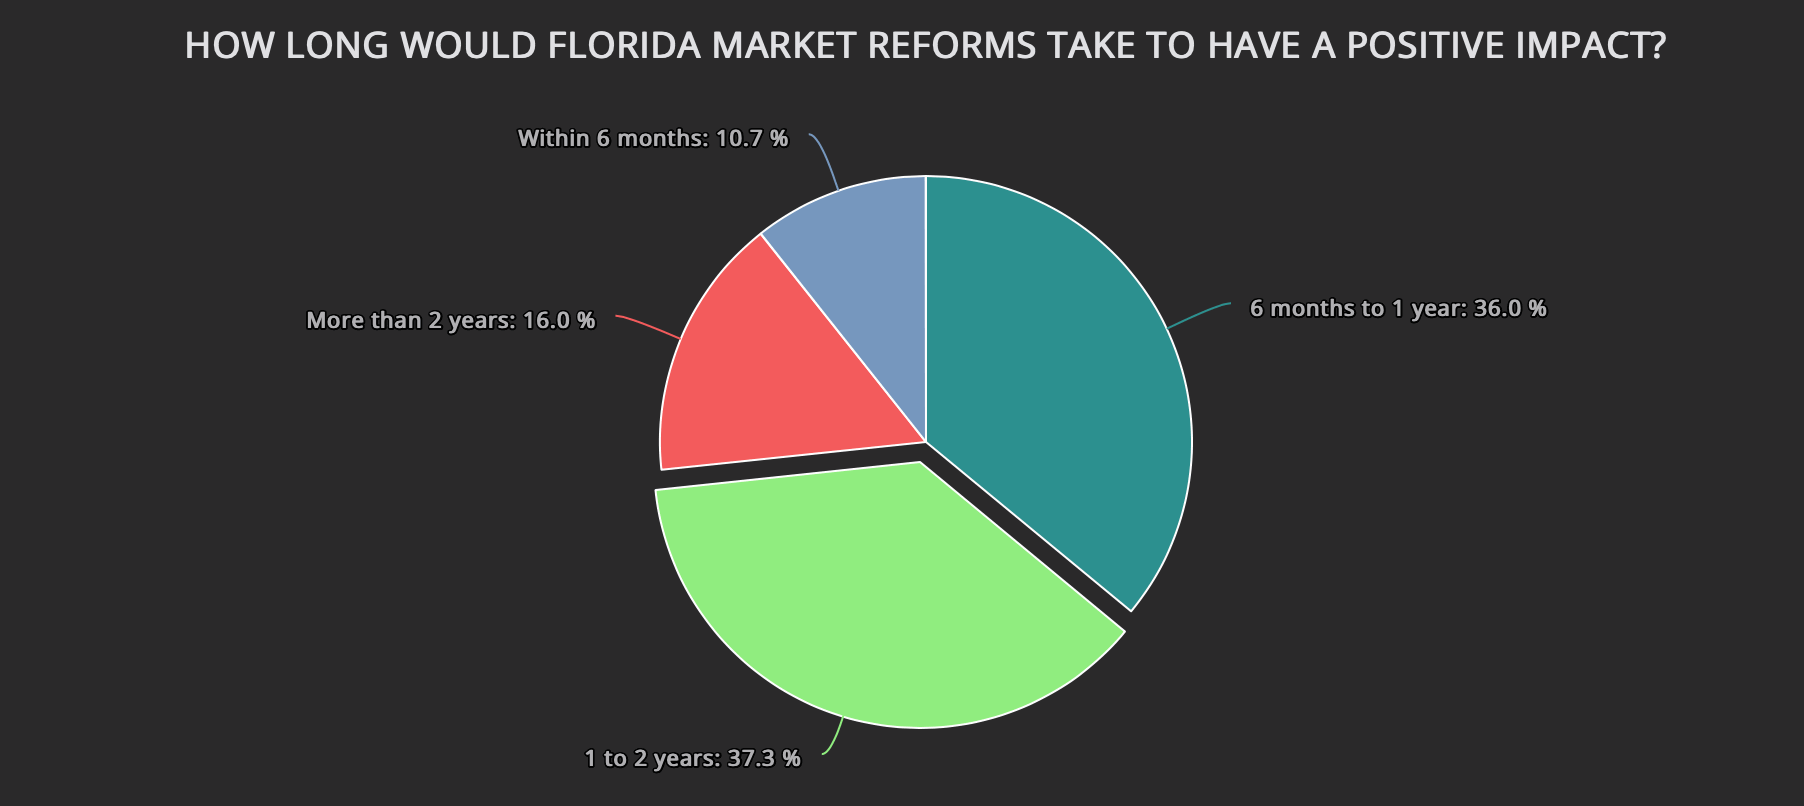 Reforms won’t have immediate positive impact on reinsurance in Florida: Survey